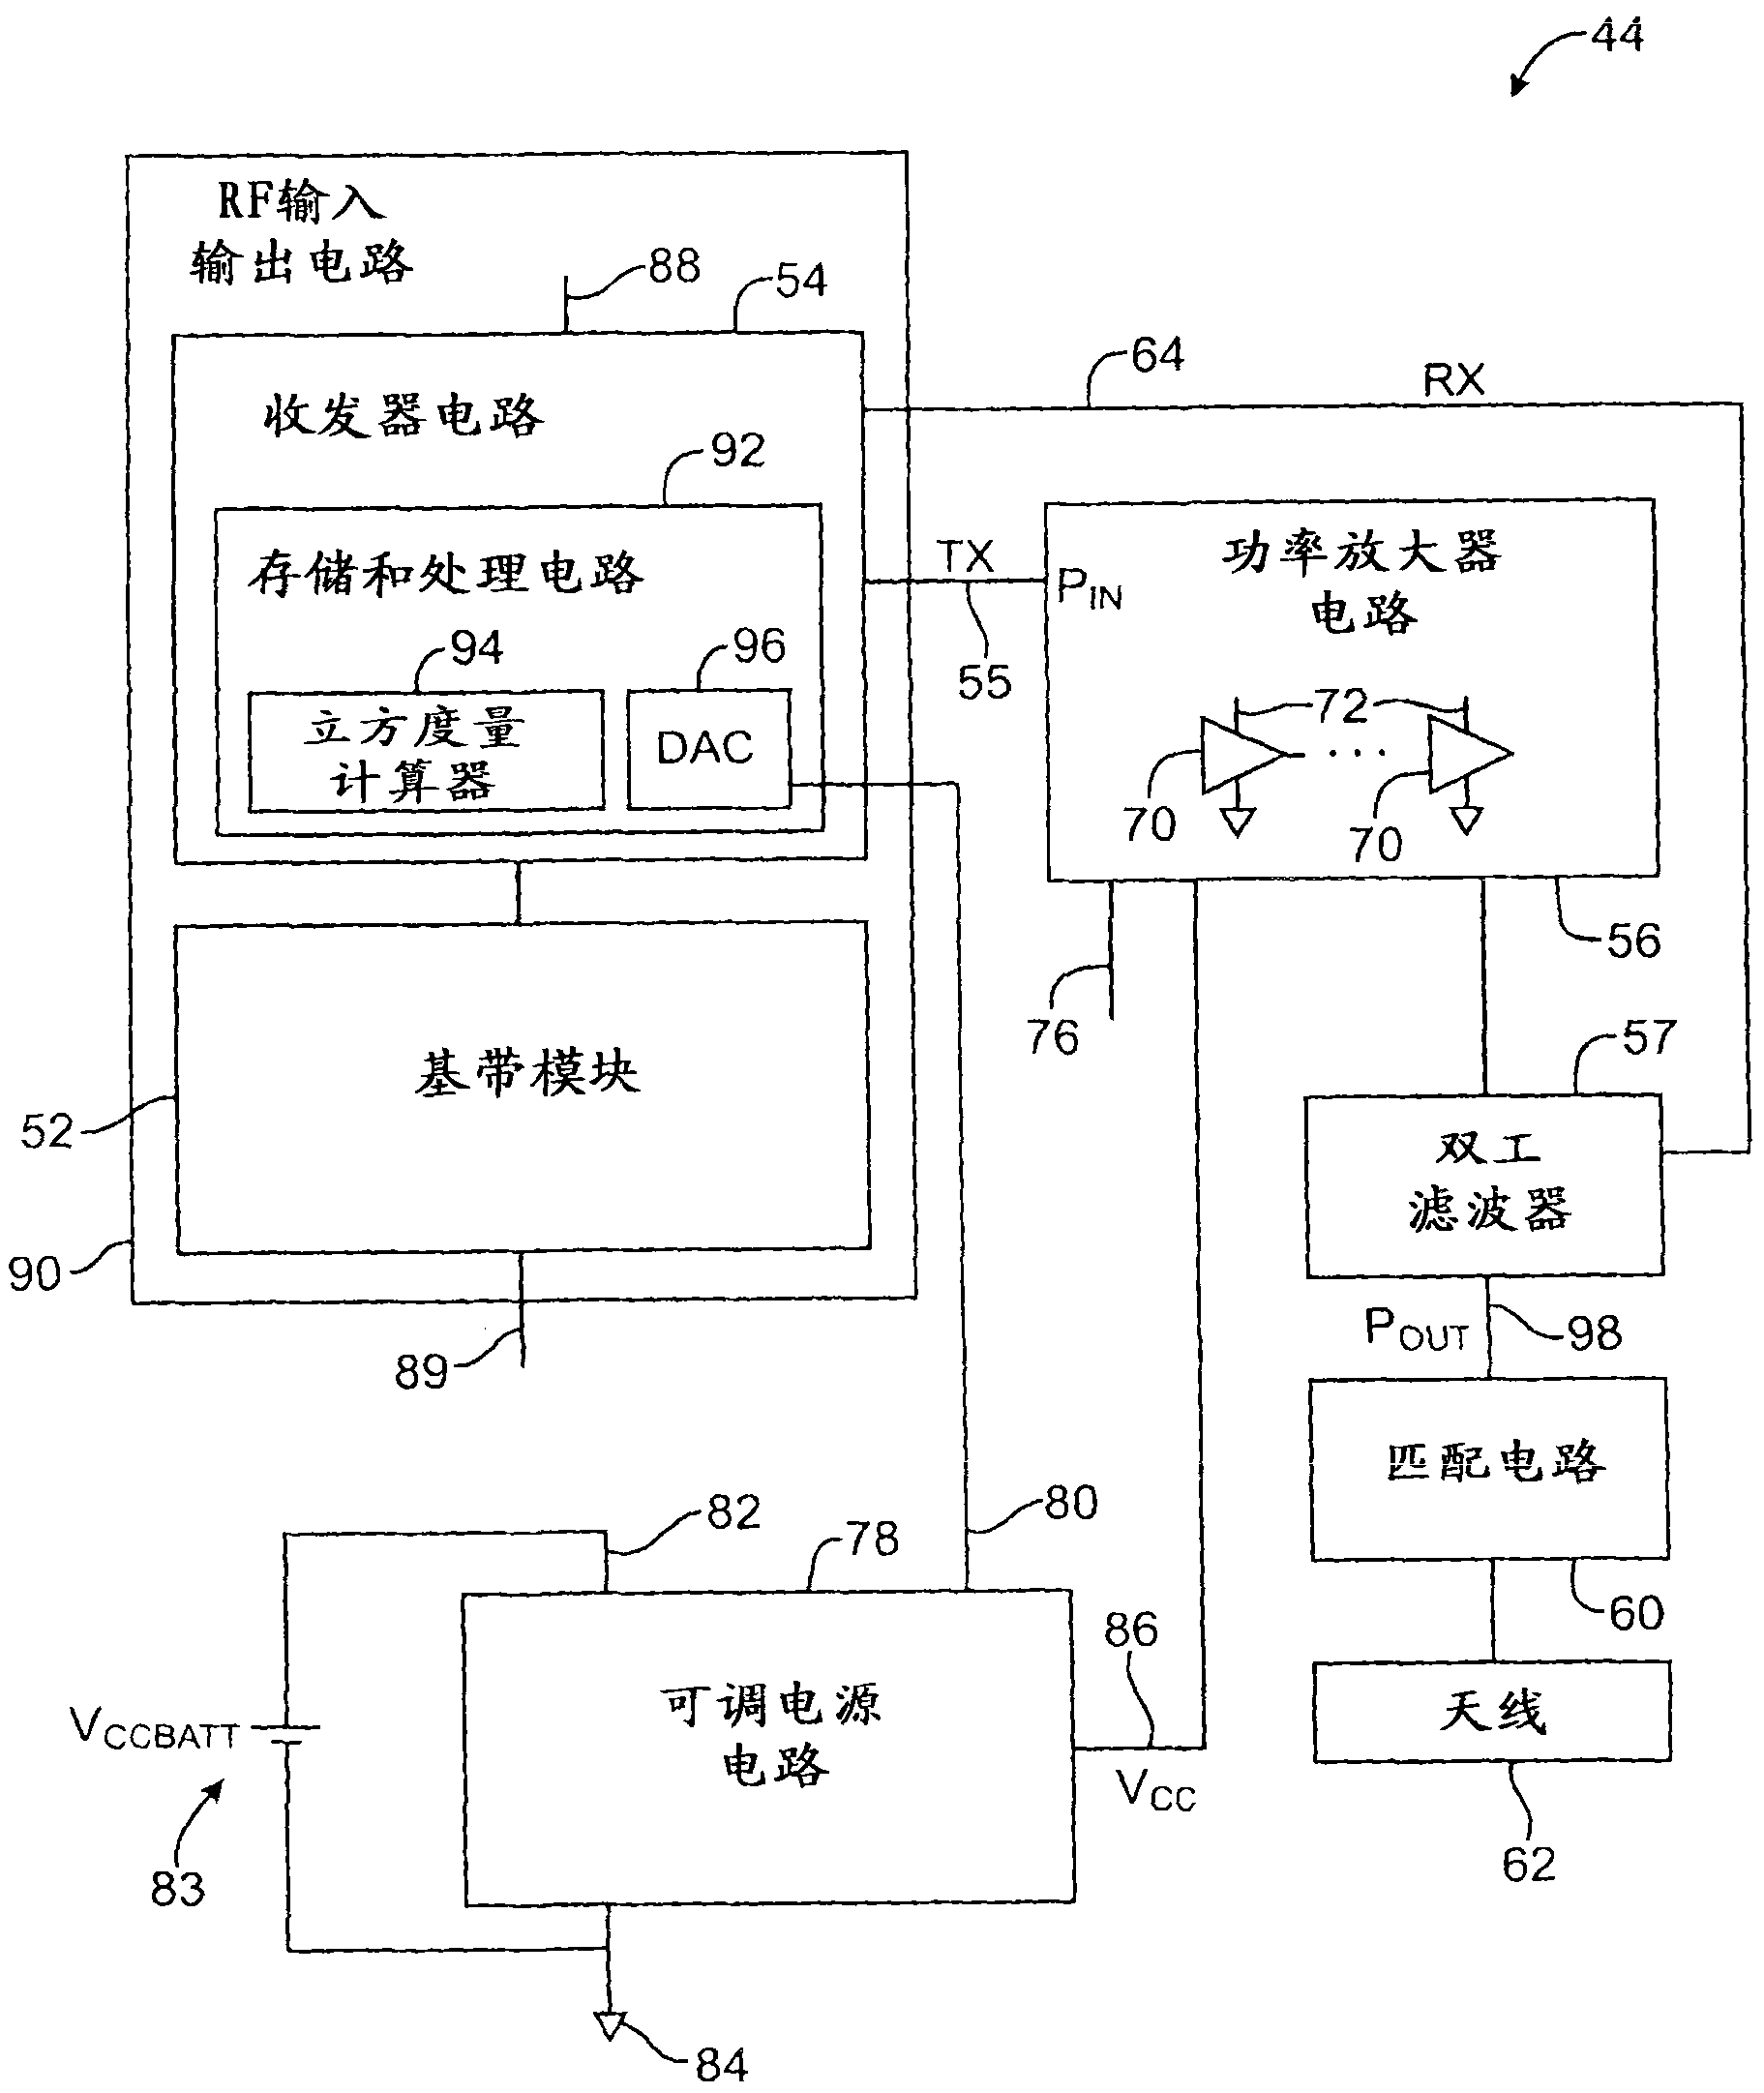 Electronic device with data-rate-dependent power amplifier bias